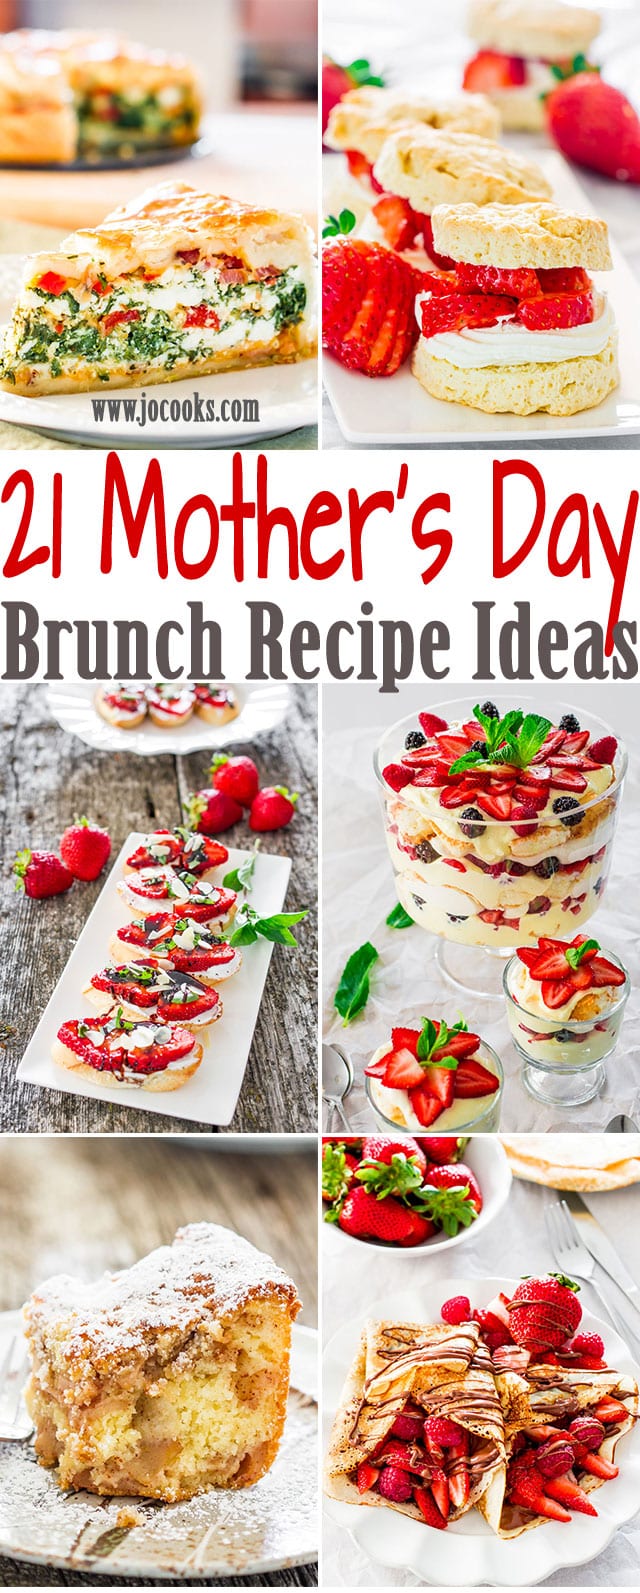 21 Mother's Day Brunch Recipe Ideas Your Mom Would Love - a collection of delicious brunch recipes that your mom will absolutely love!